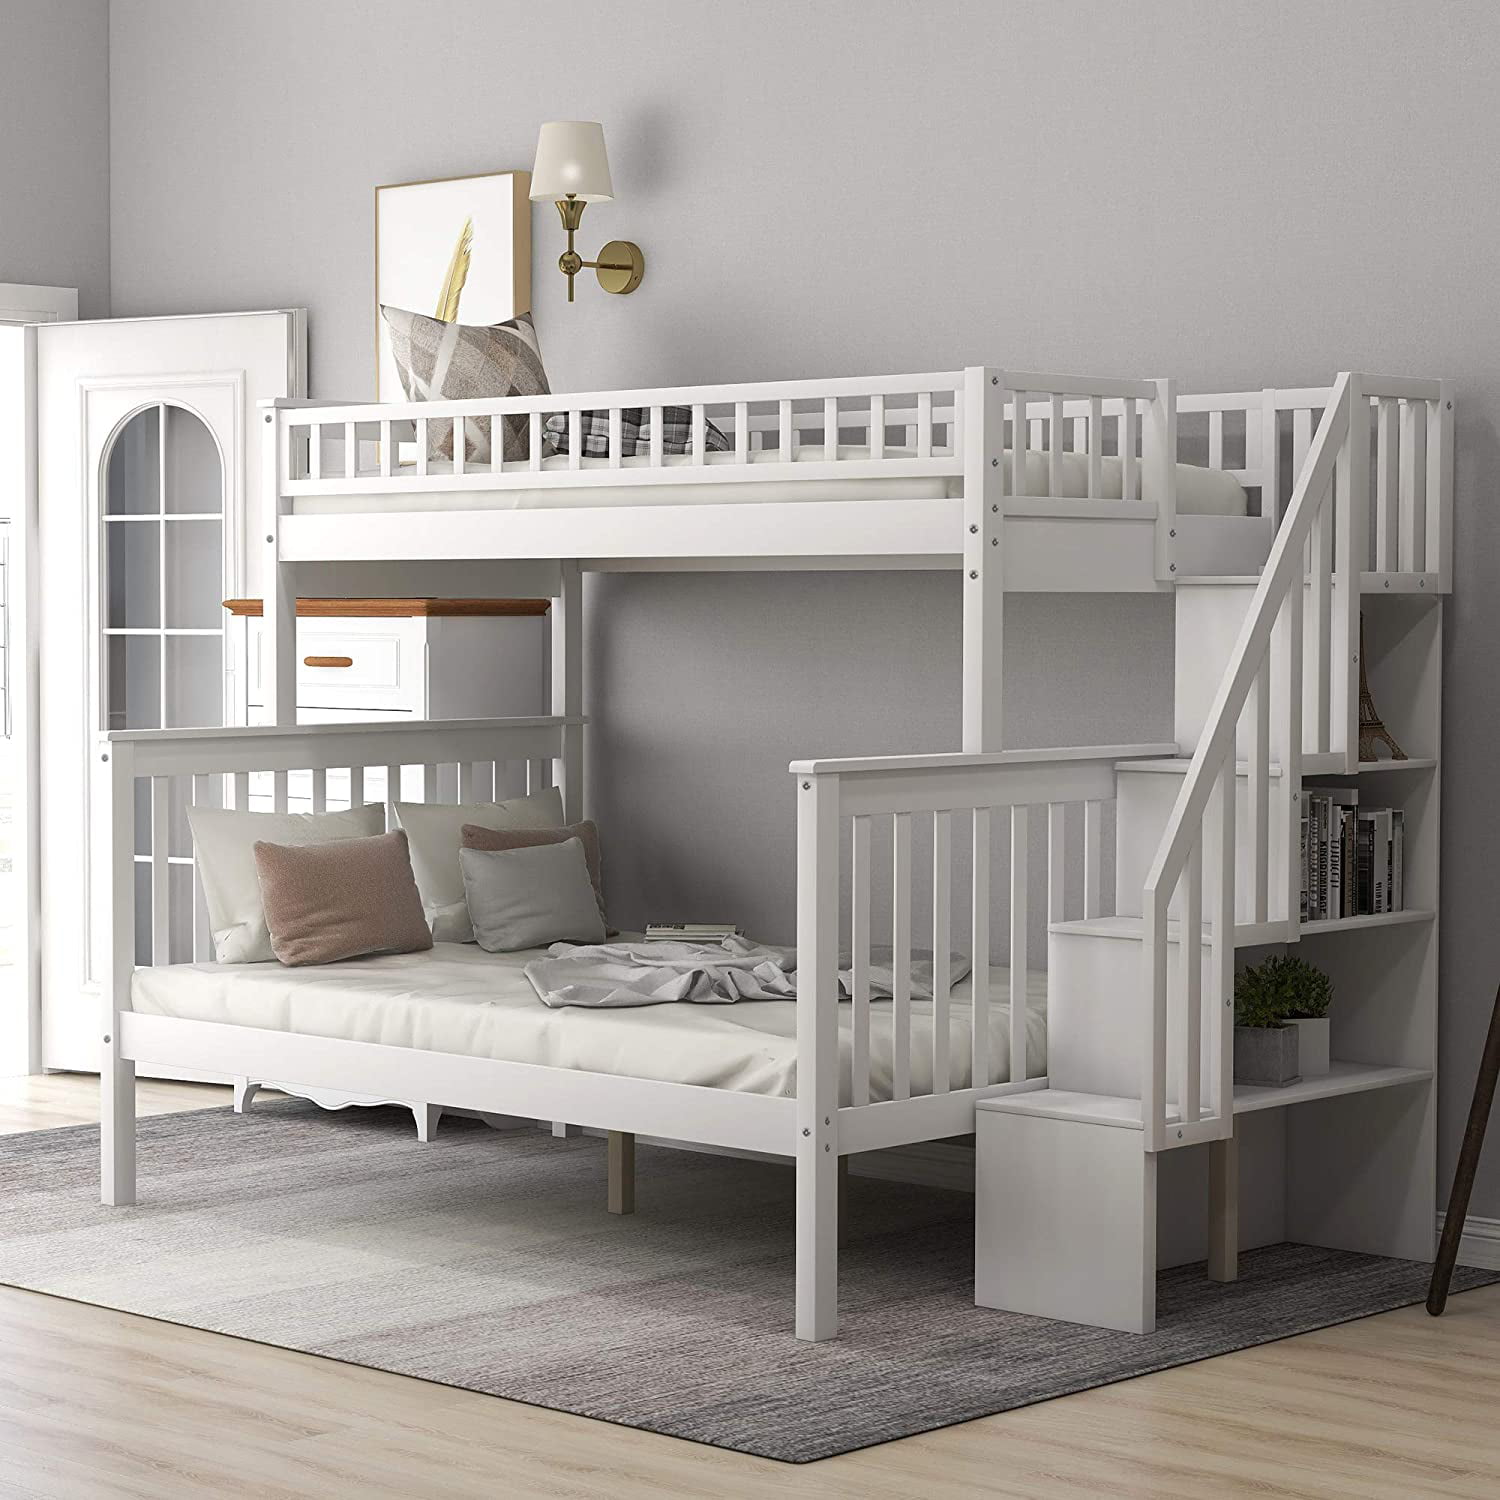 Solid Wood Bunk Bed Twin Over Full, Solid Wood Bunk Beds With Storage